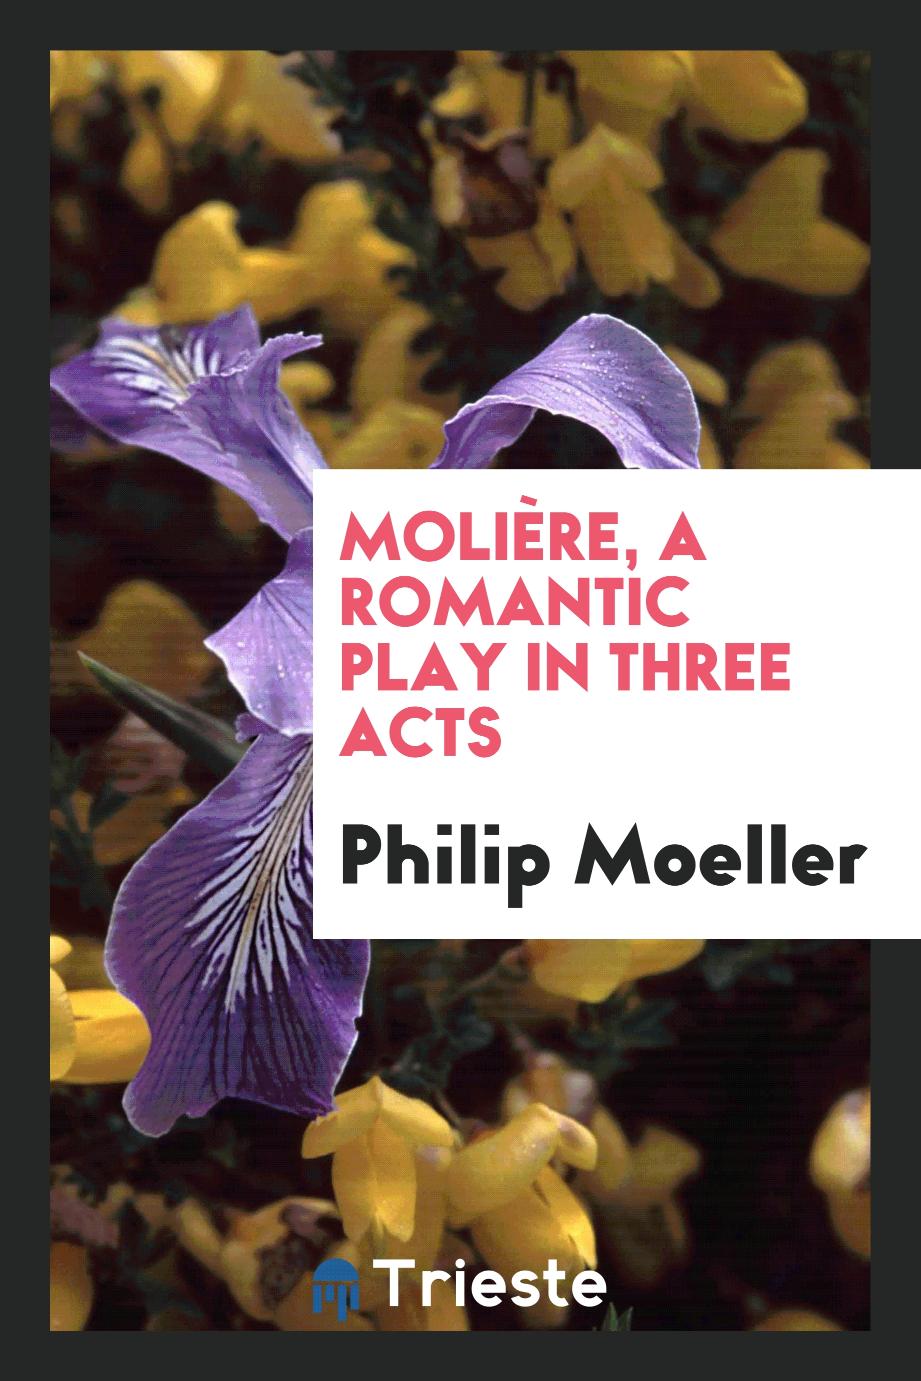 Molière, a romantic play in three acts